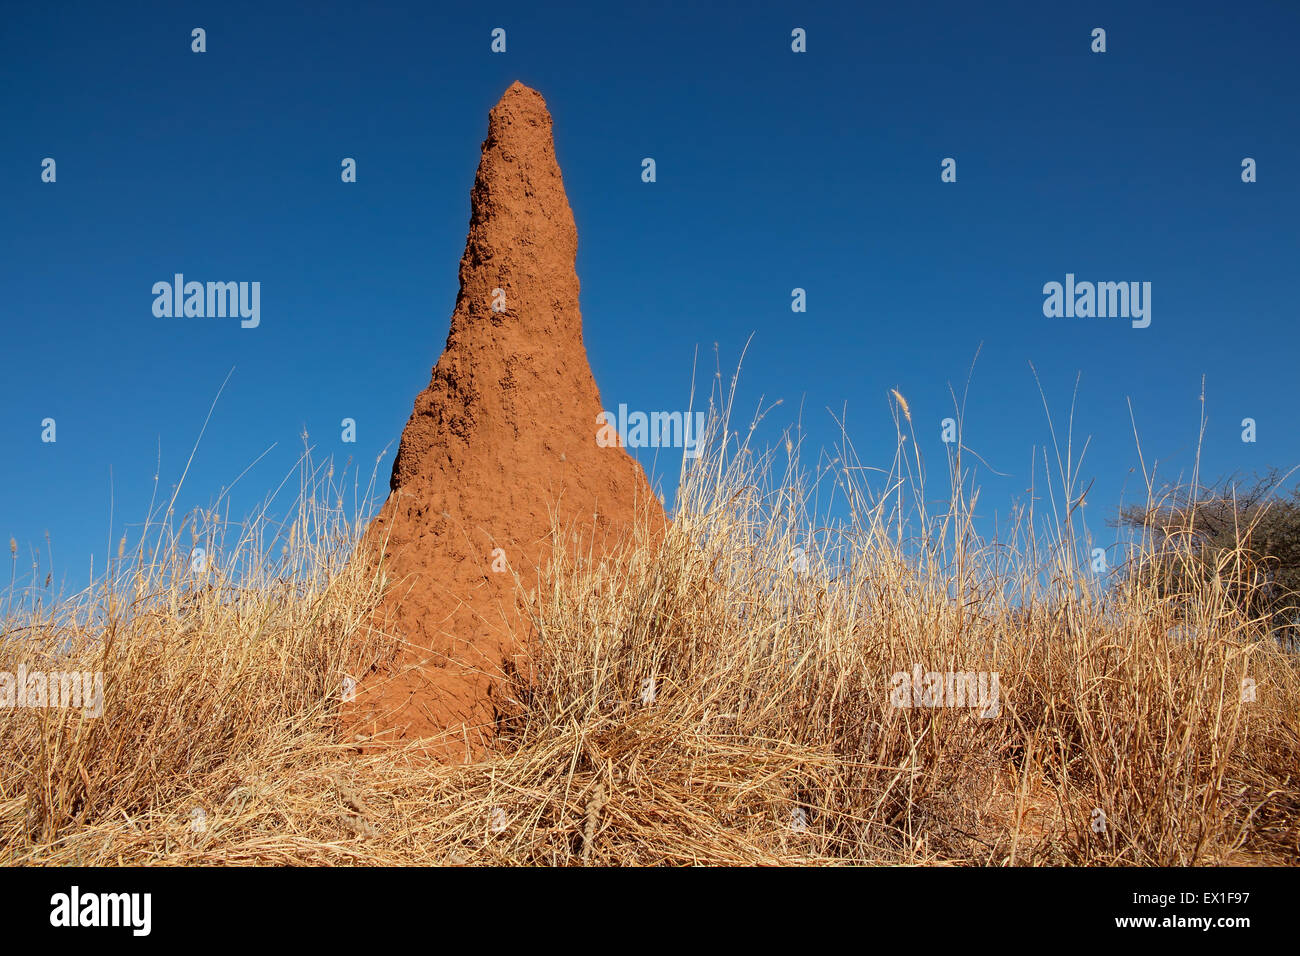 Massive termite mound against a blue sky, southern Africa Stock Photo